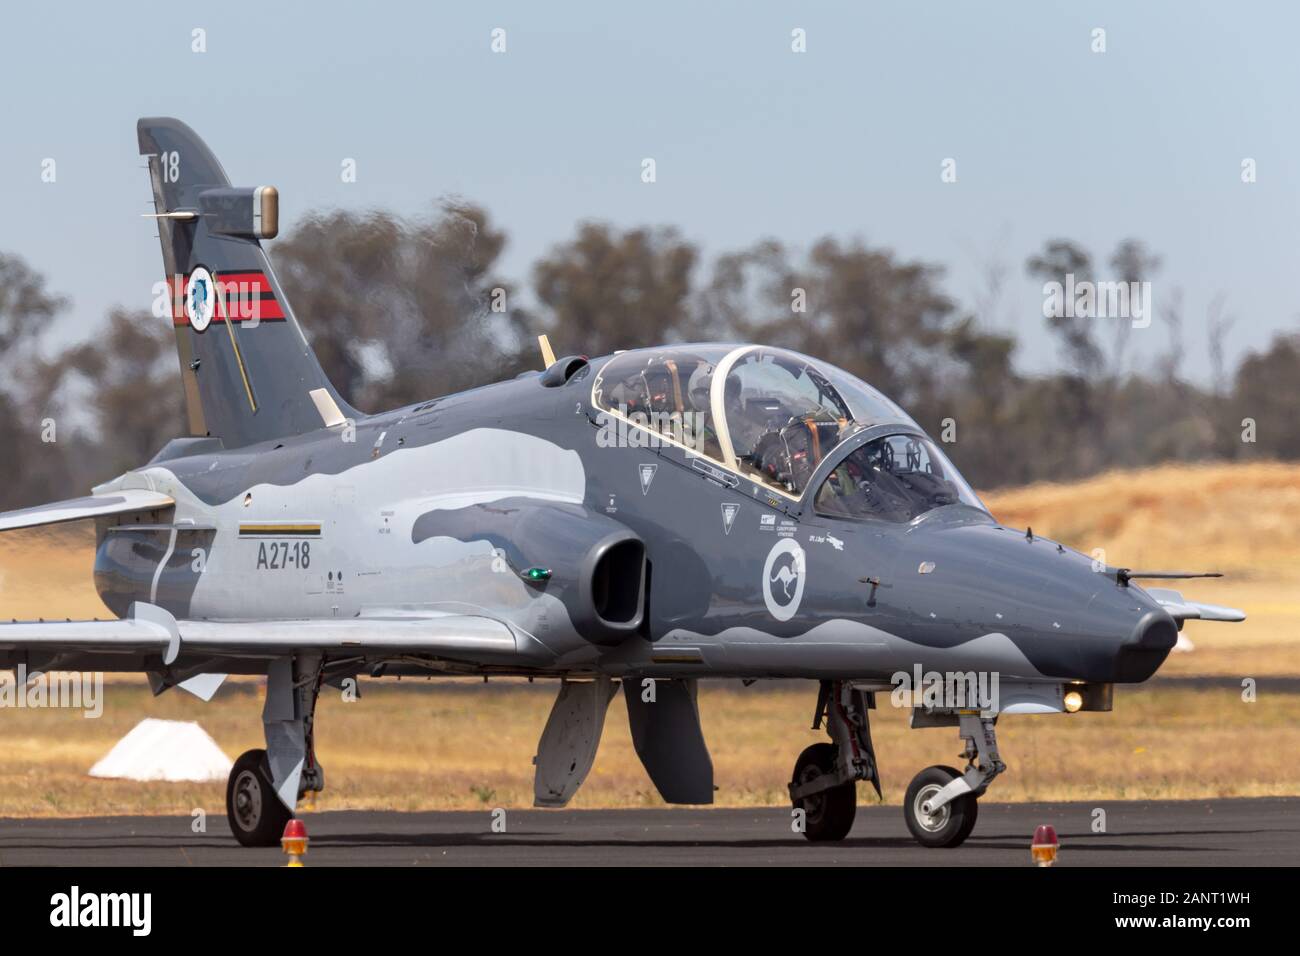 Royal Australian Air Force (RAAF) BAE Hawk 127 lead in fighter trainer aircraft A27-18 from No. 76 Squadron based at RAAF Base Williamtown. Stock Photo